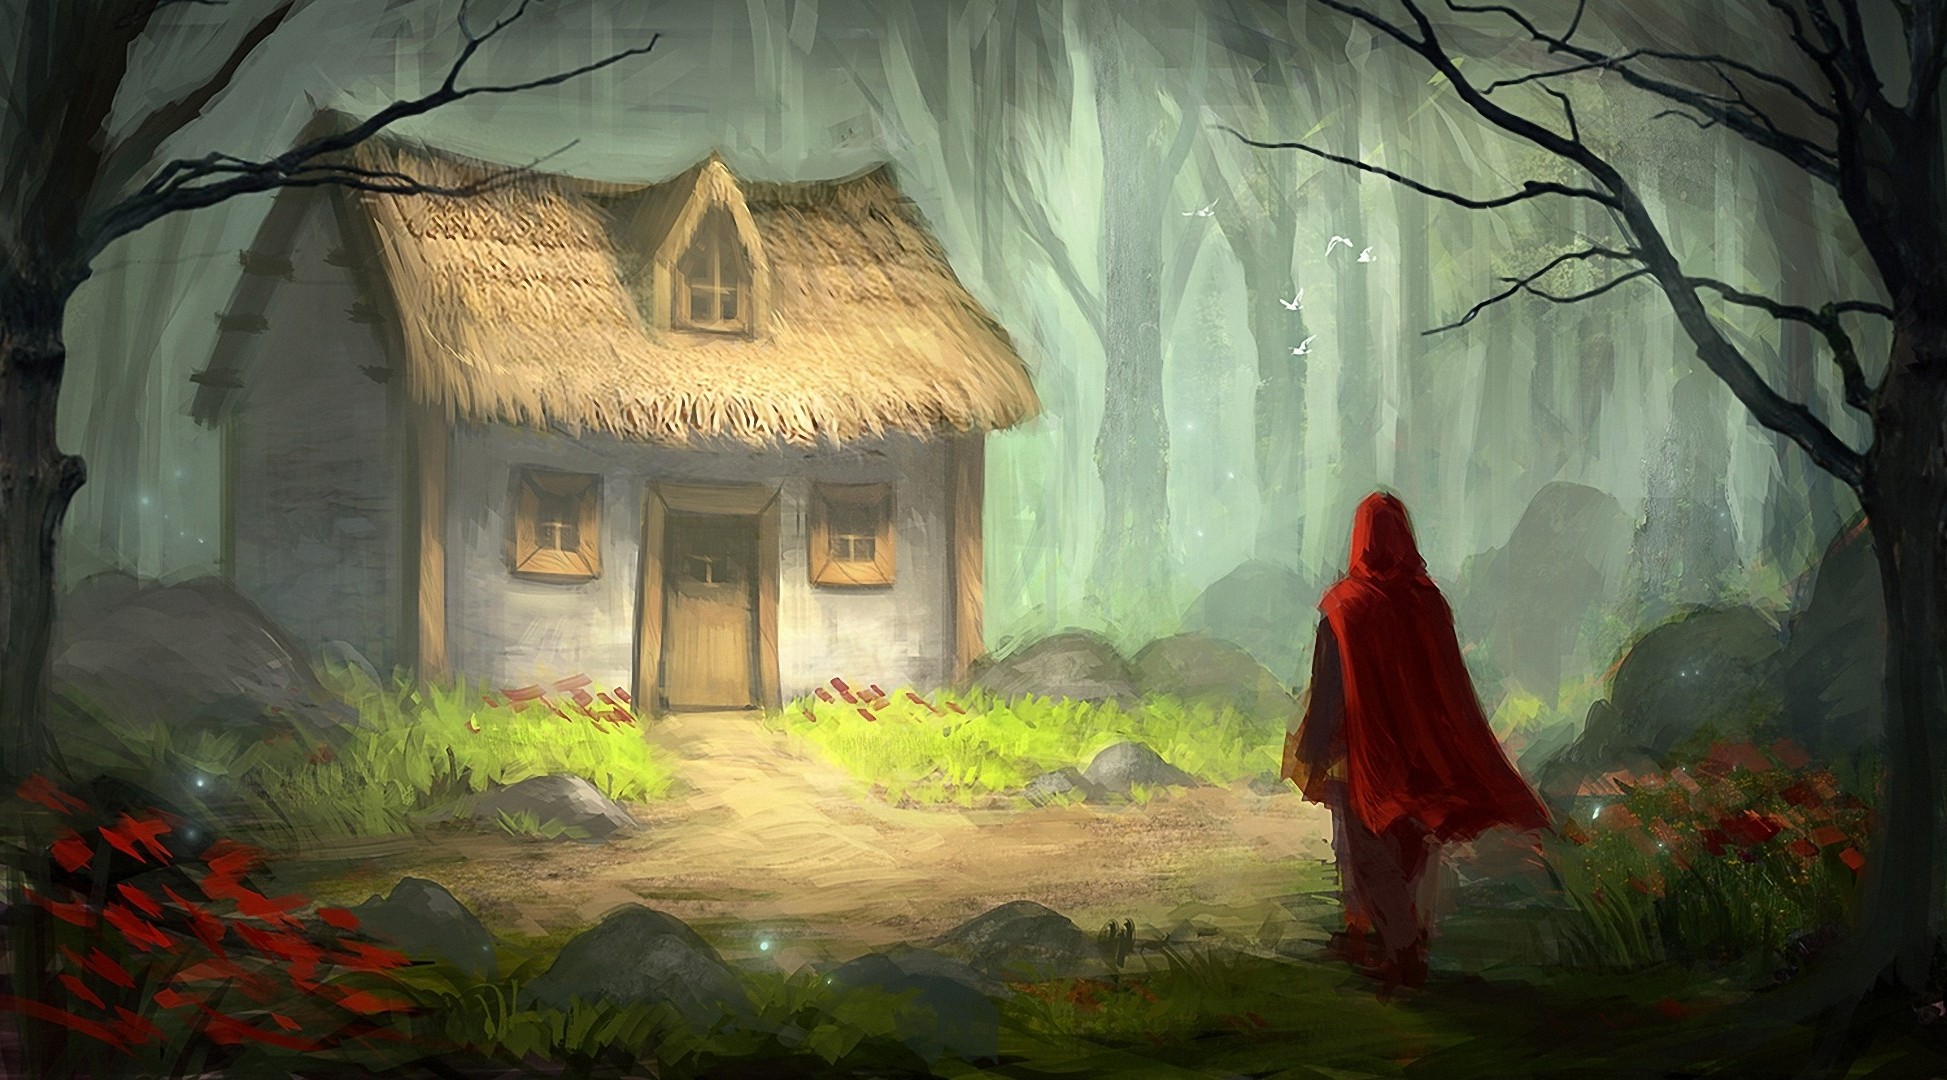 digital Art, Fantasy Art, Fairy Tale, Little Red Riding Hood, Trees, Forest, House, Painting, Grass, Stones, Flowers Wallpaper